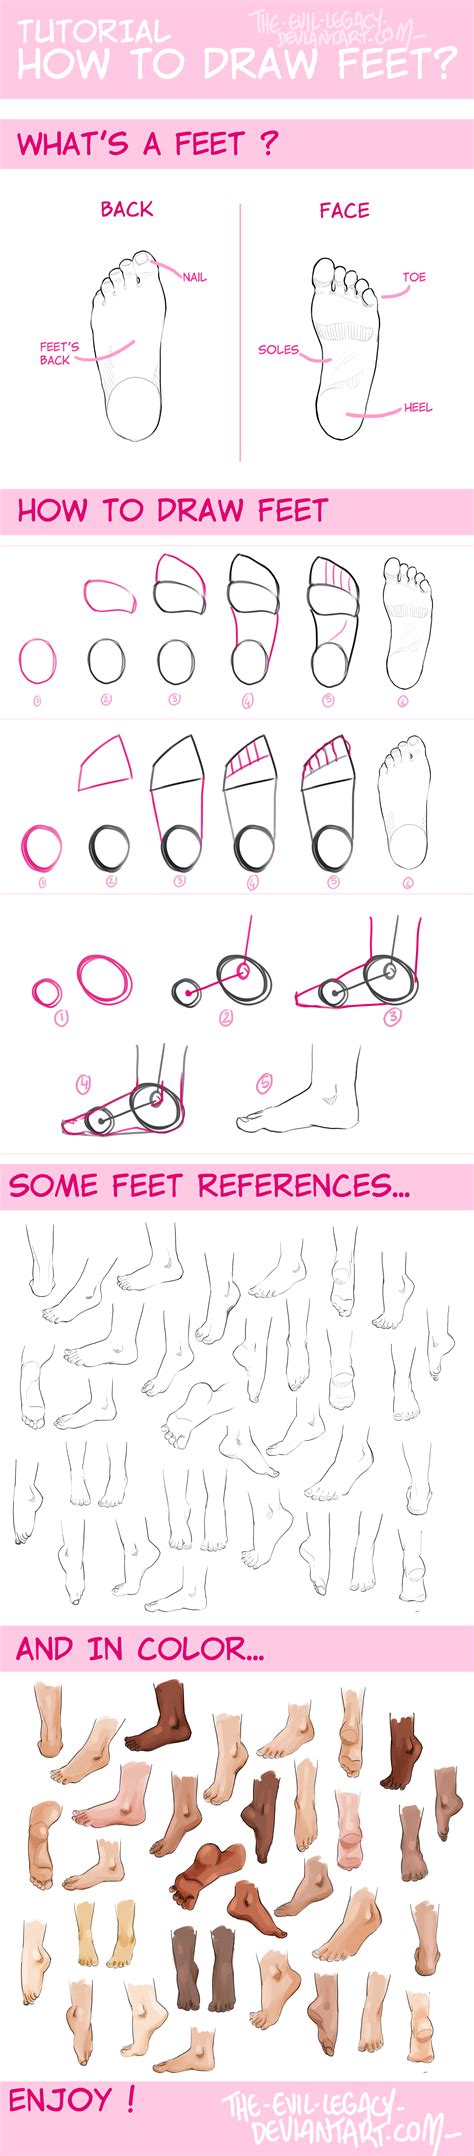 Tuto How To Draw Feet By The Evil Legacy On Deviantart